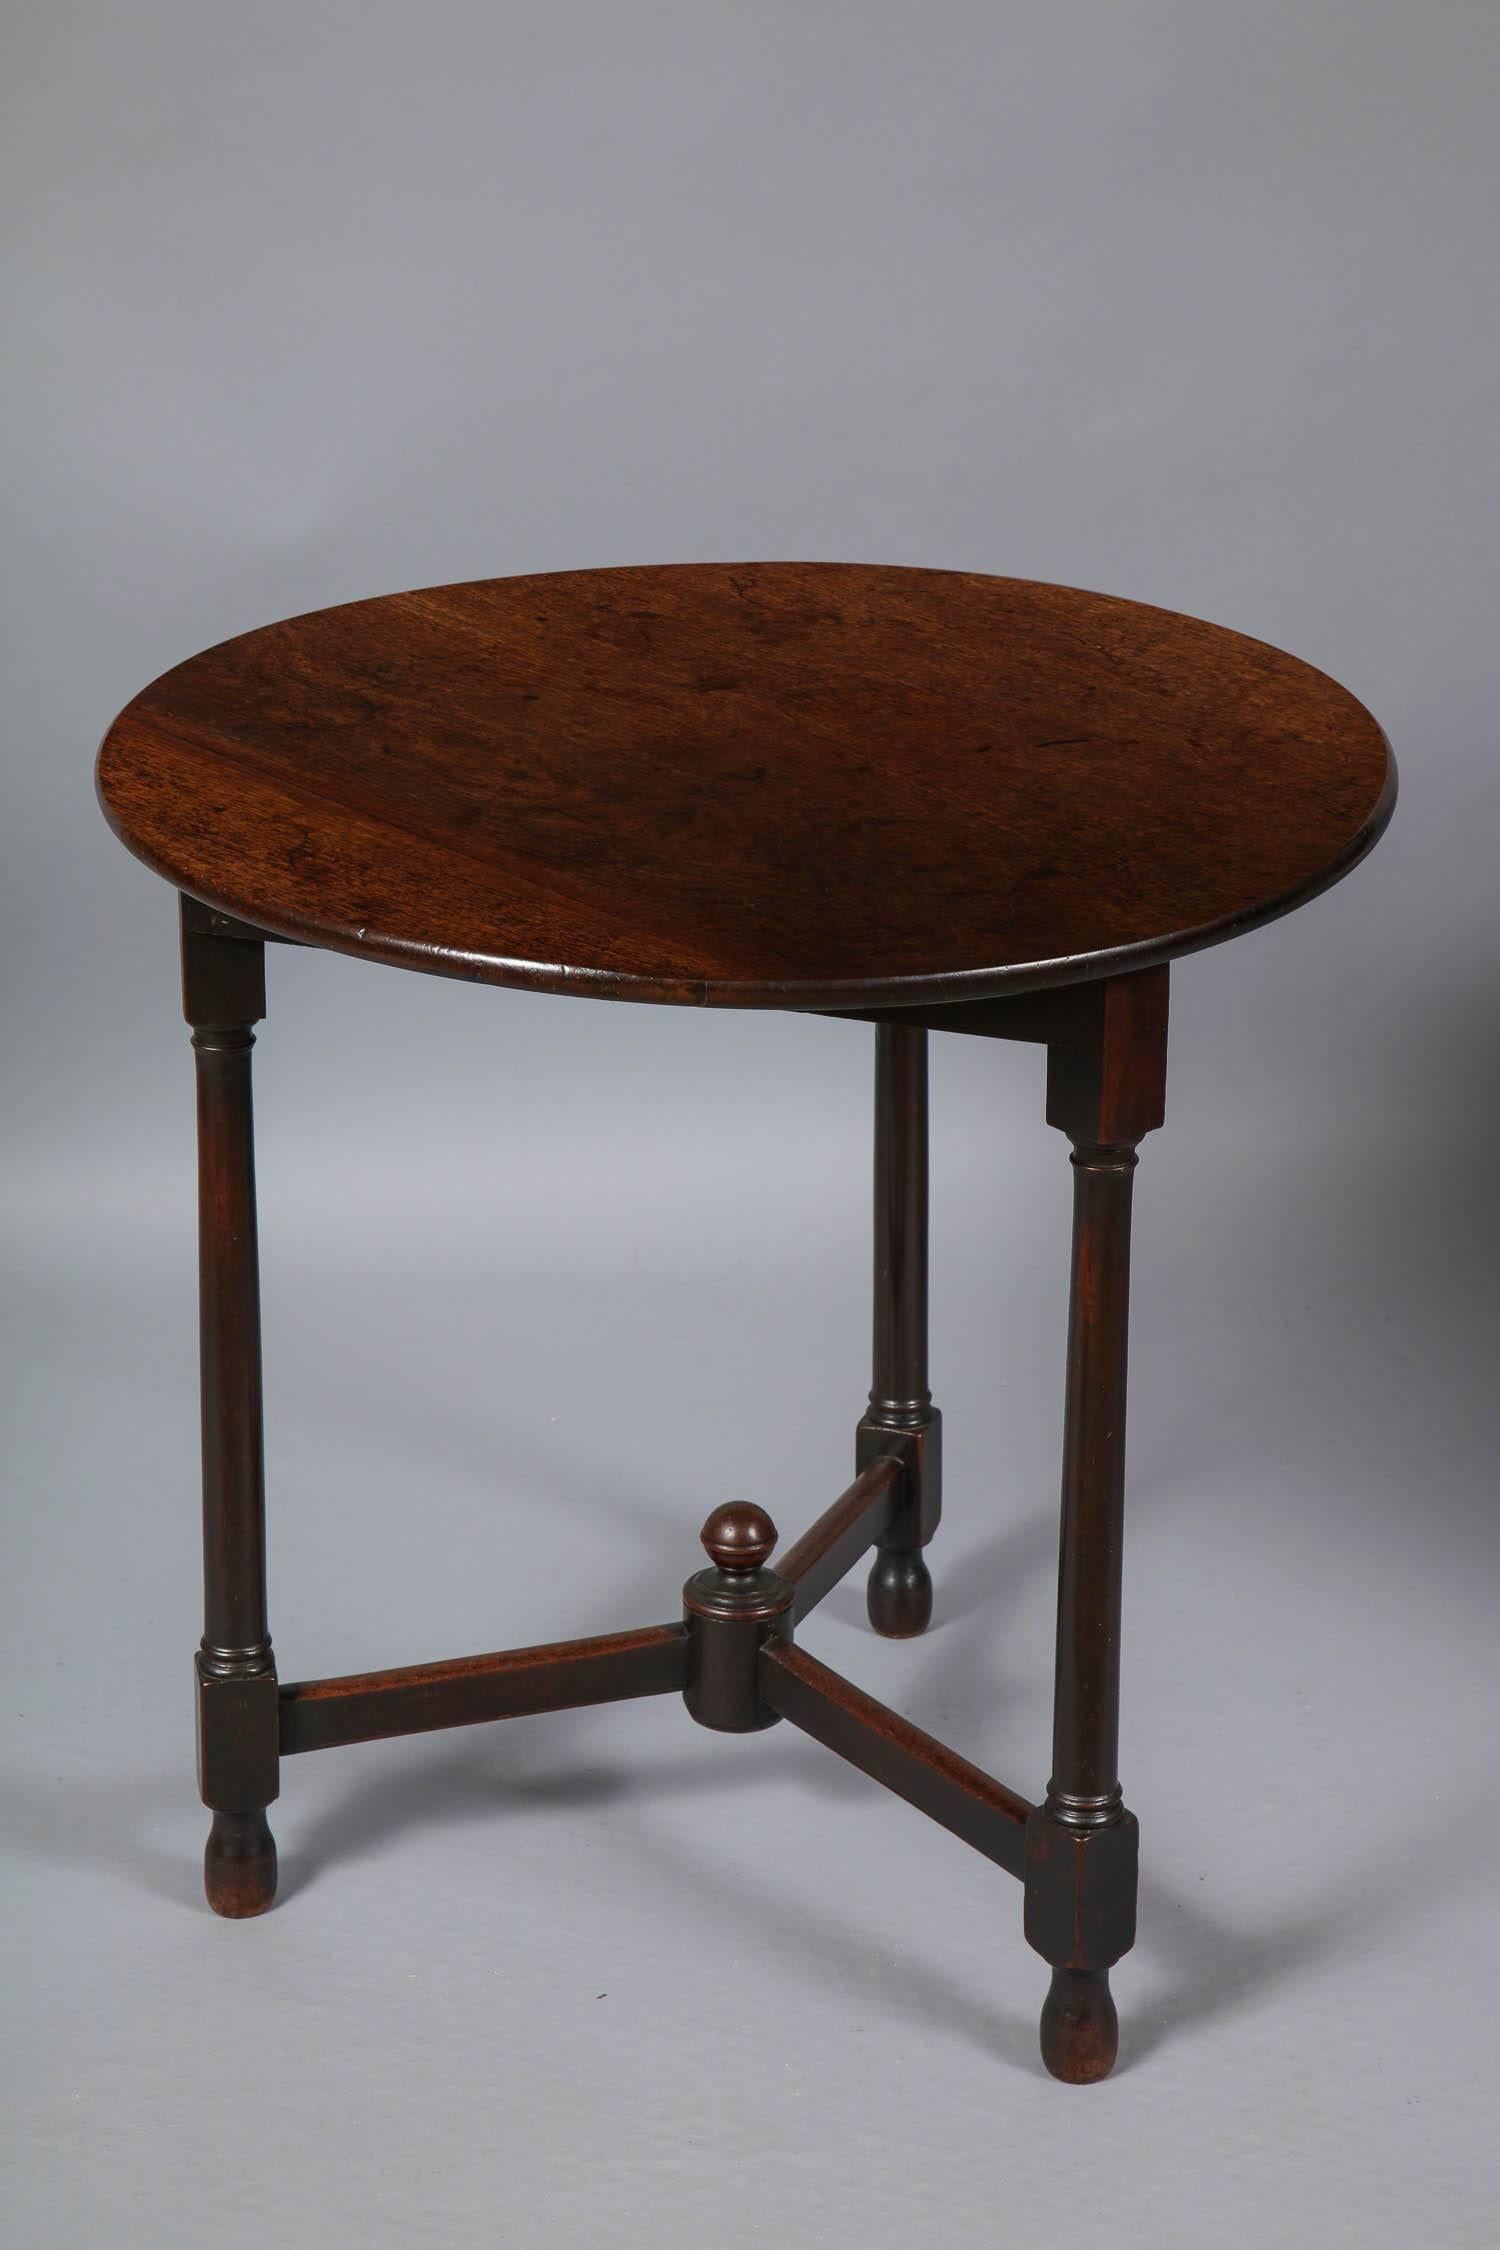 Rare Georgian mahogany cricket table, the top in richly figured plum pudding mahogany having rounded edges, over three cannon-barrel turned legs on blocked feet with original elongated ball feet, joined by three part stretchers joined by central